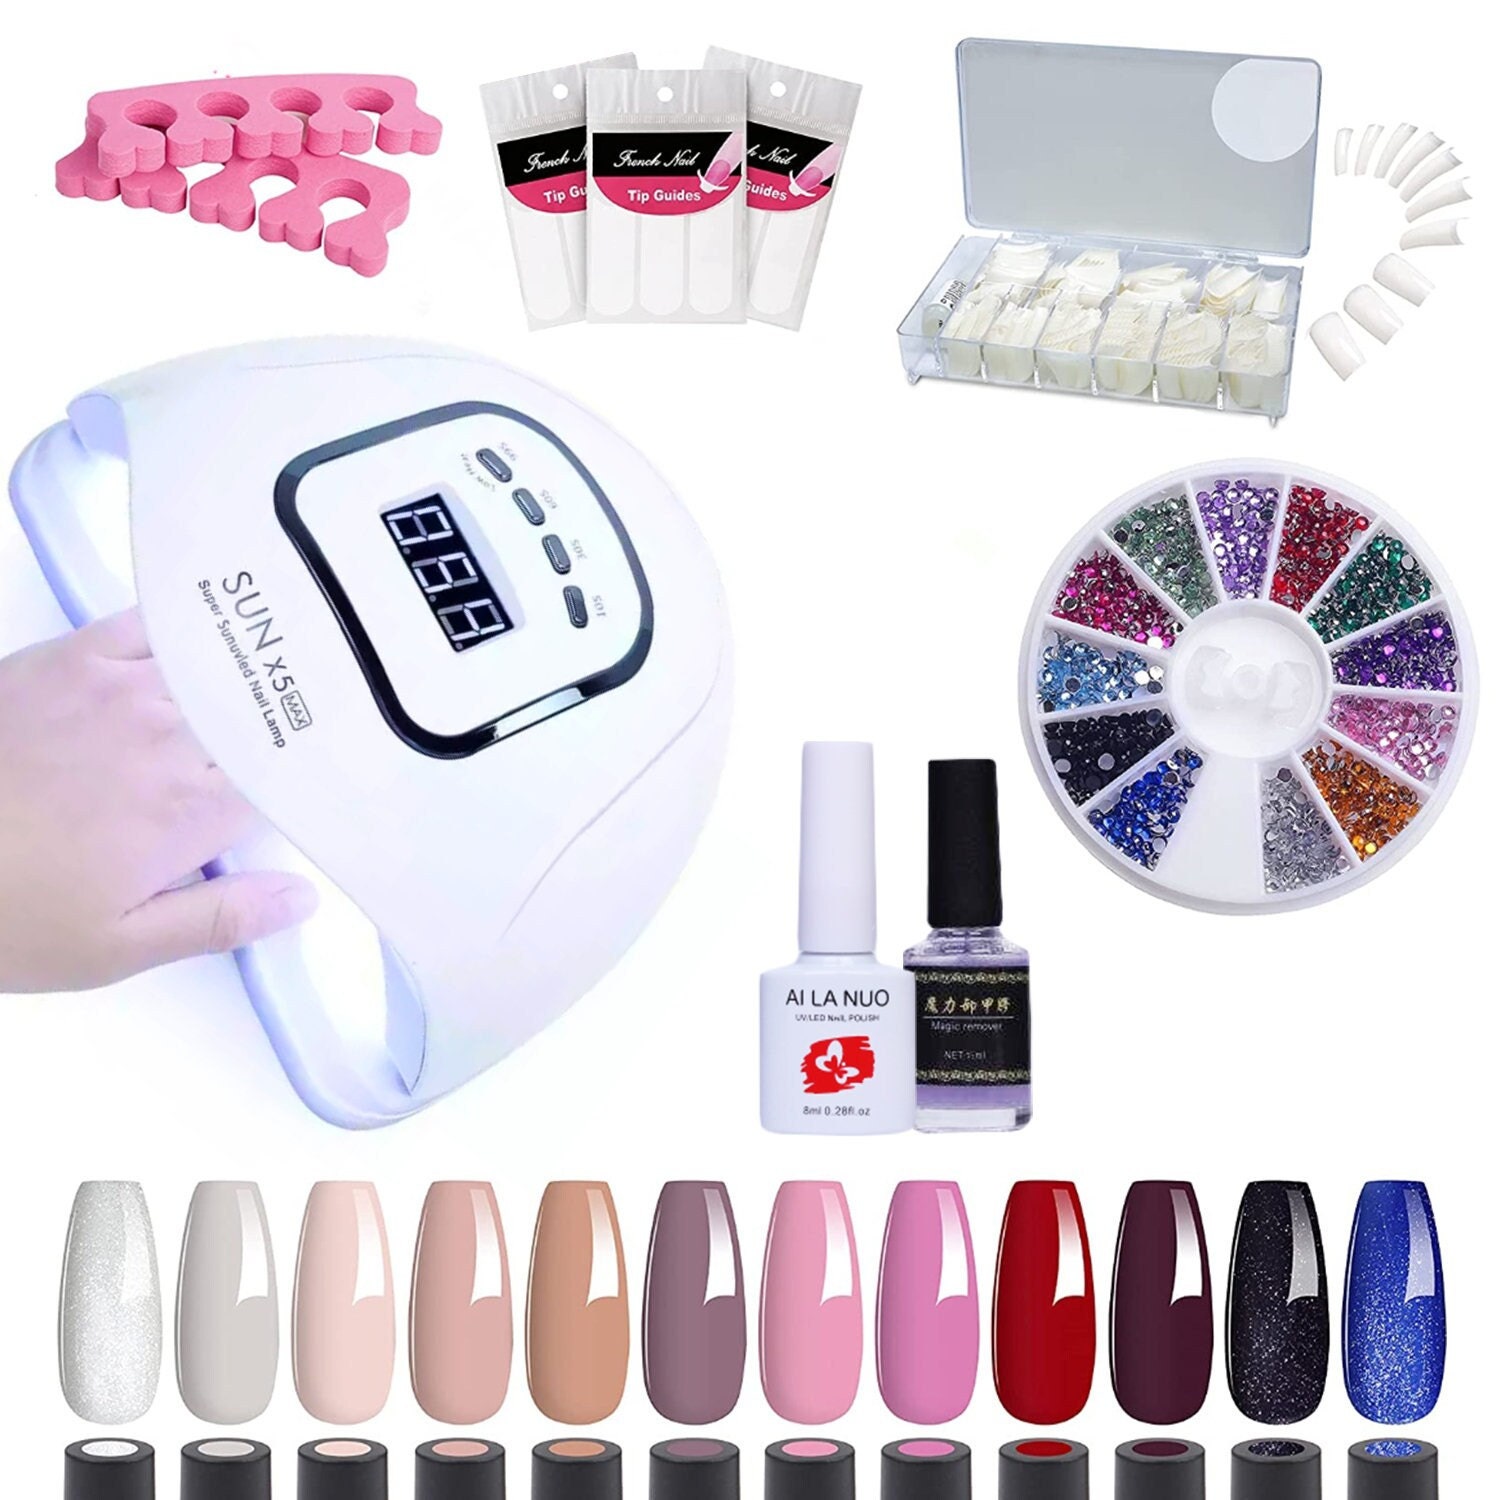 VLCC Pedicure-Manicure Hand & Foot Kit: Complete Nail Care Set for  Professional Spa-Quality Treatments